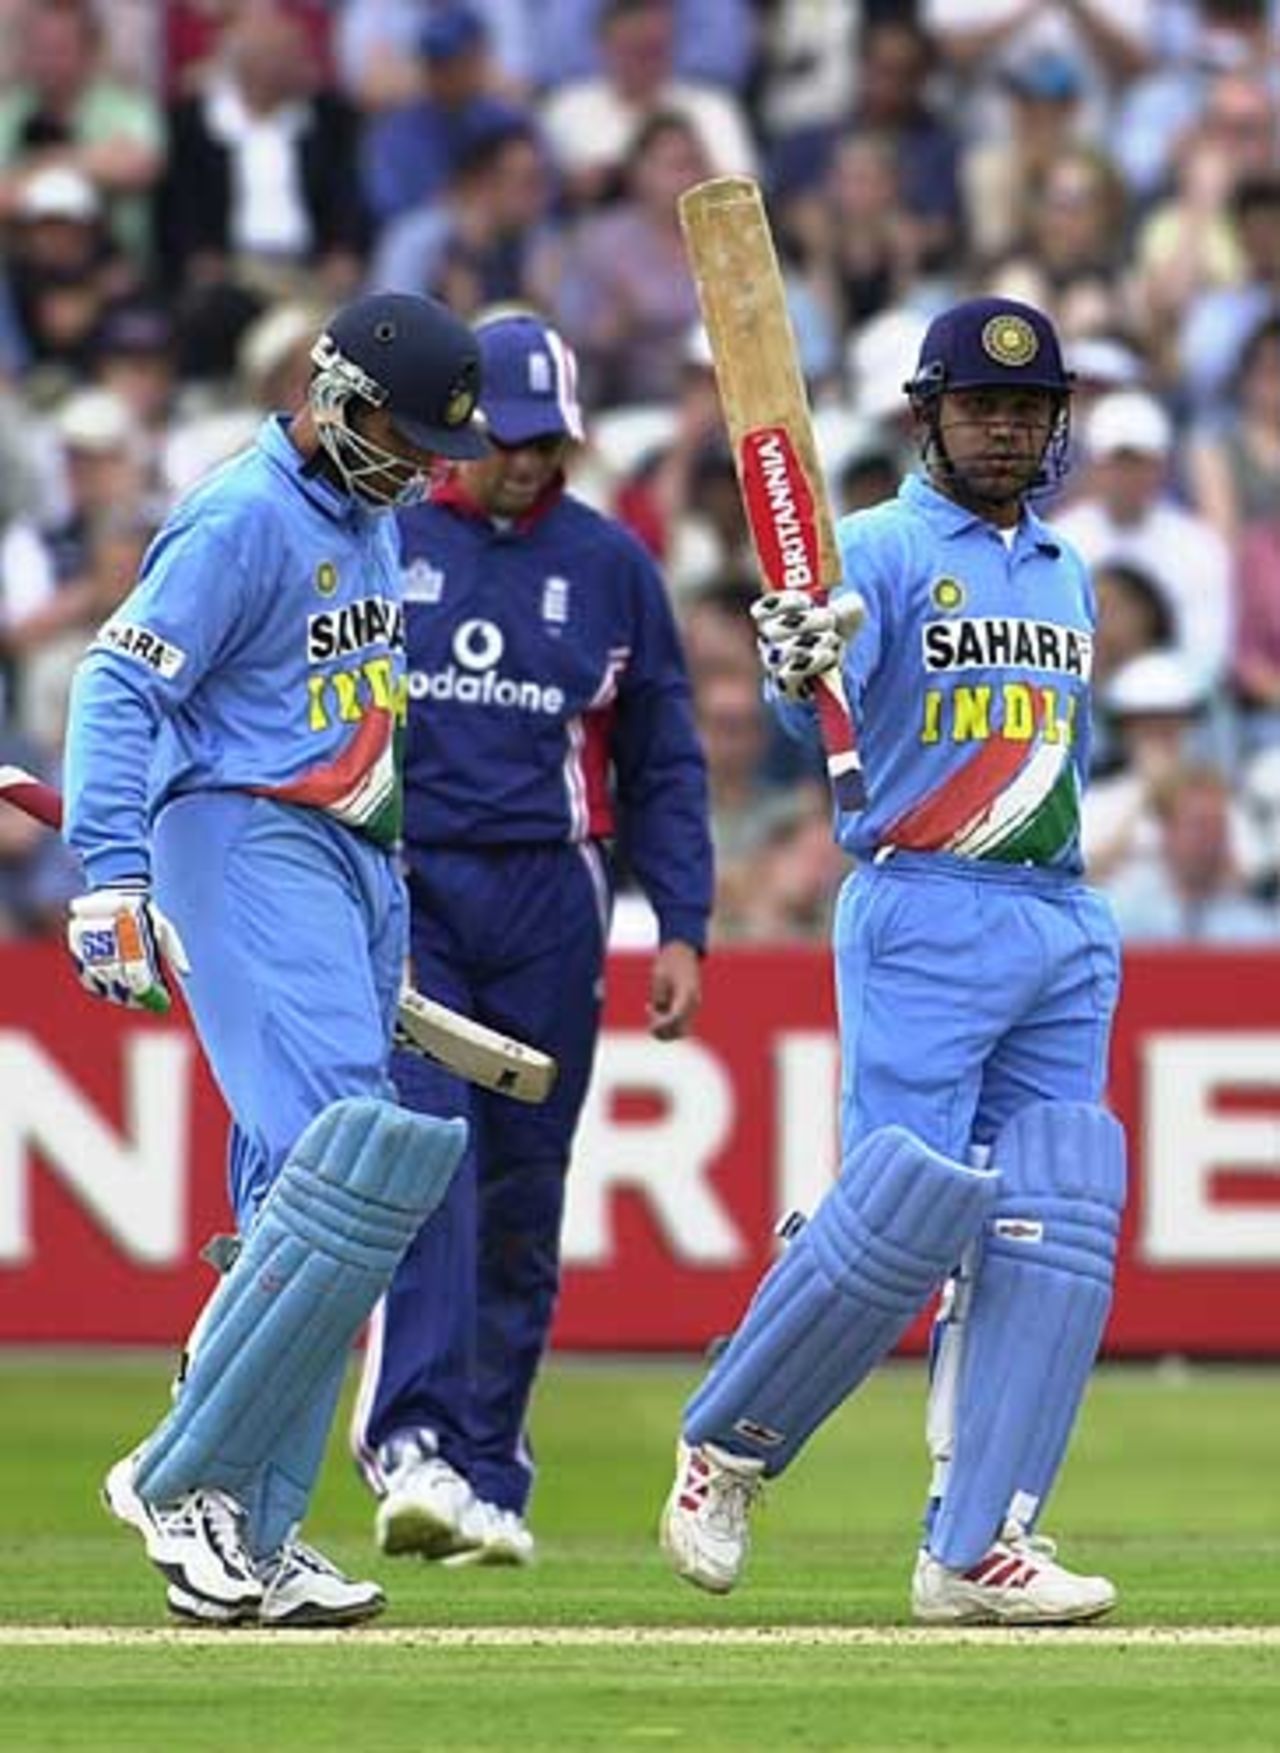 Sehwag reaches a wonderful 50 at Lord's, here with opening partner Ganguly, England v India, NatWest Series, Lord's, Sat 29 Jun